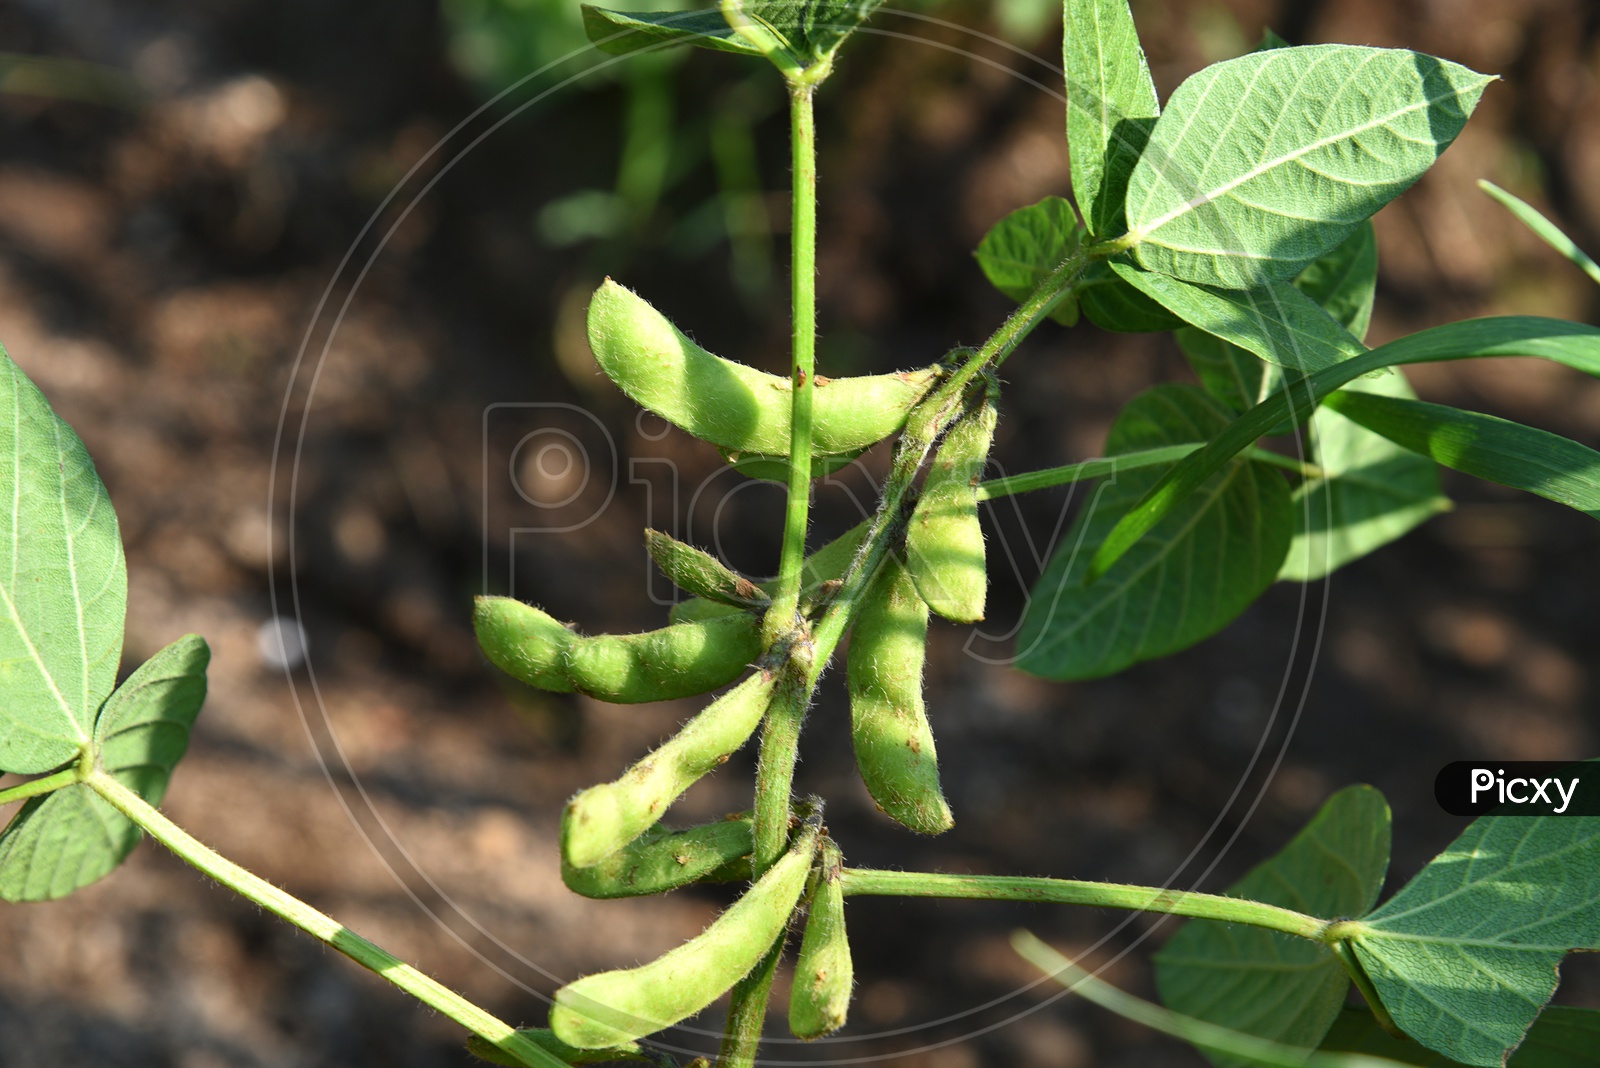 Soya Beans Growing On Plants In an Agricultural Farm